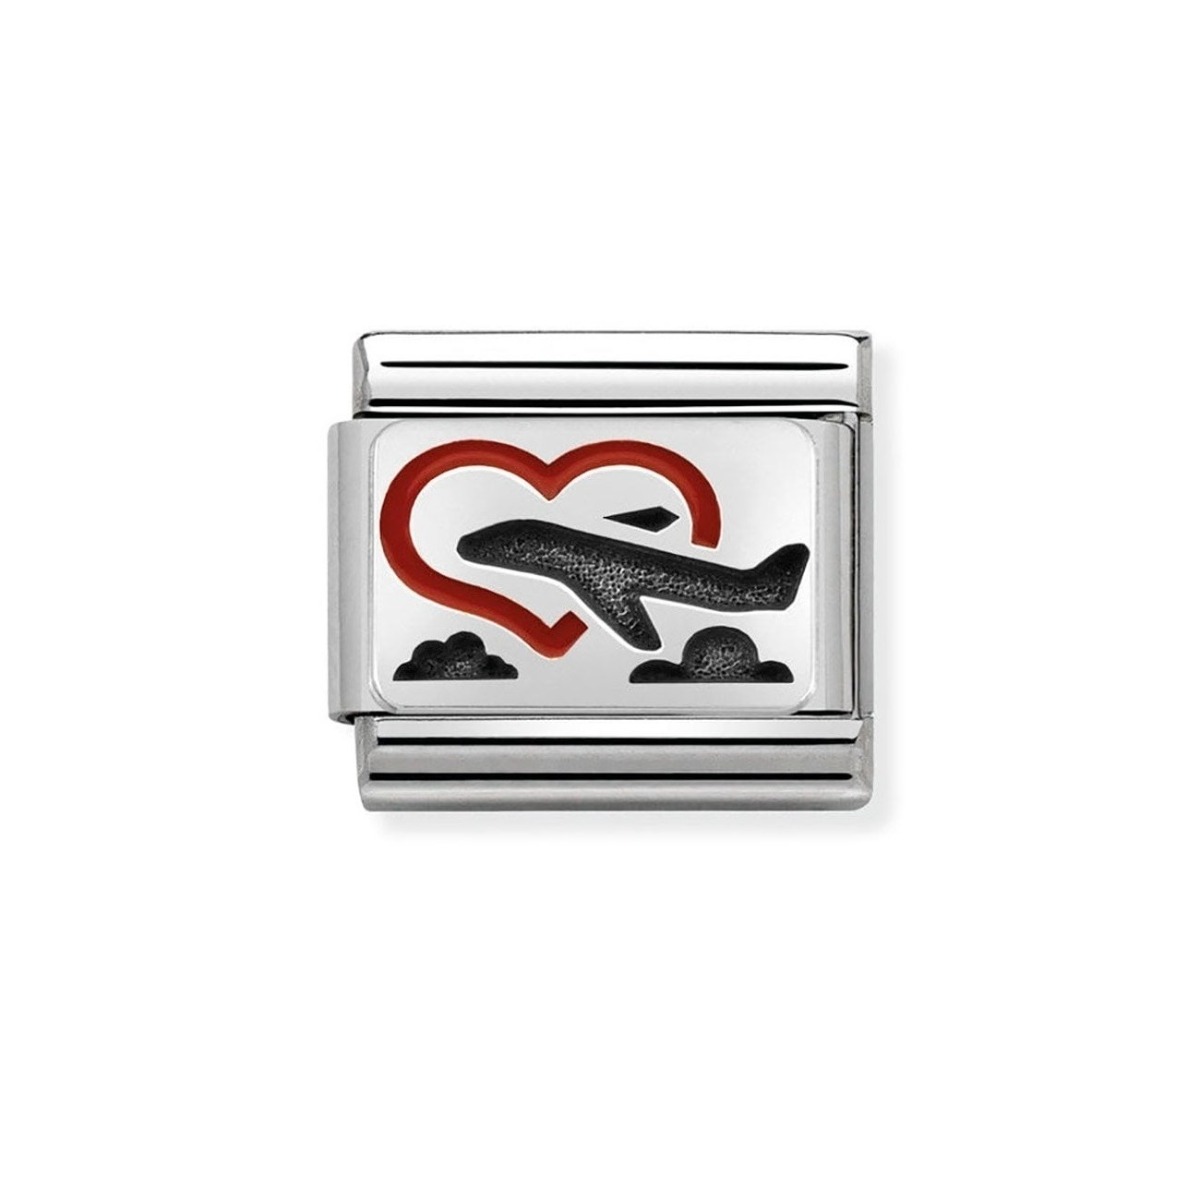 Nomination Classic Red Enamel Heart with Plane Charm  330208_02